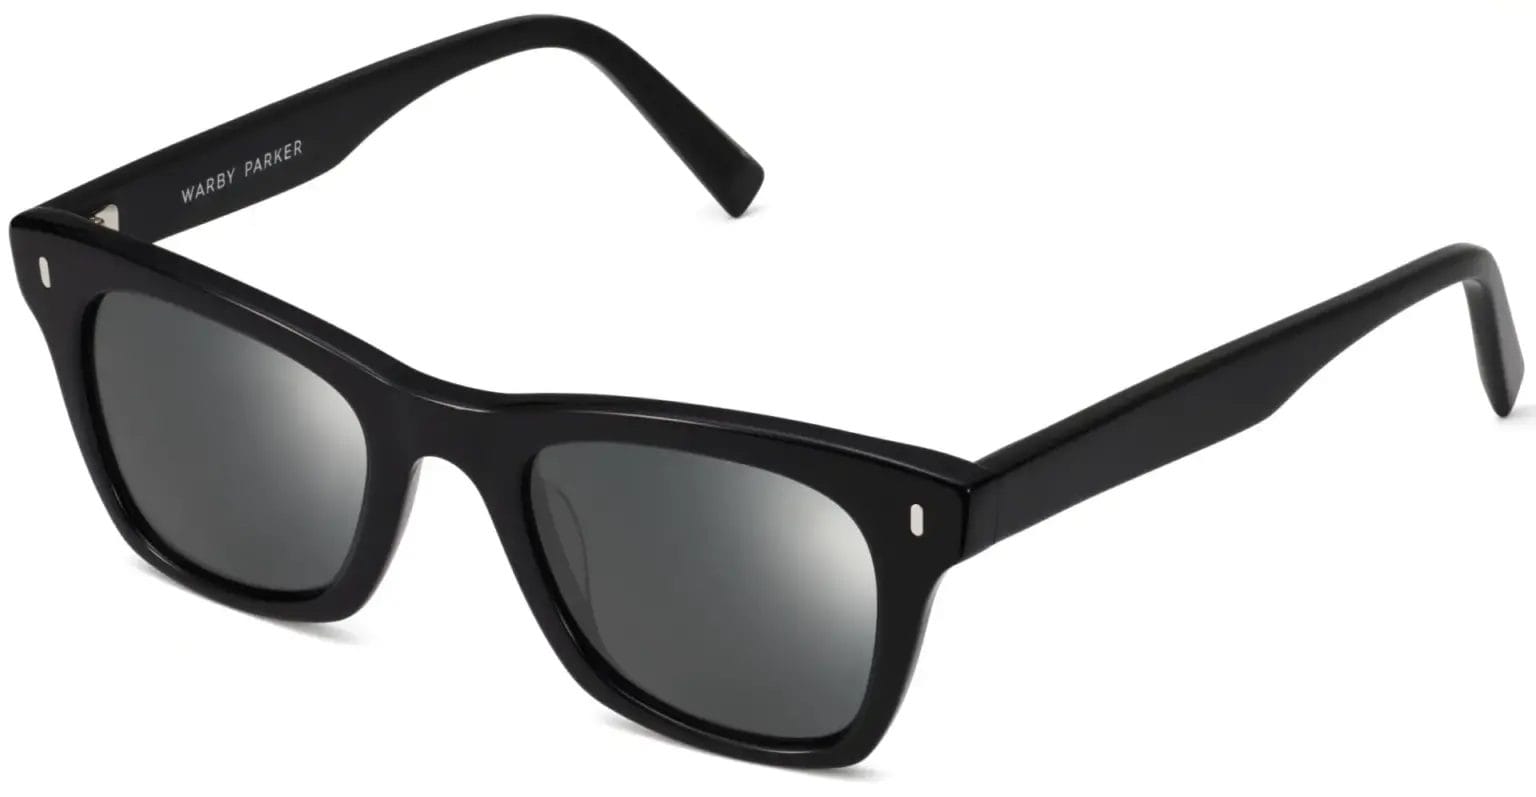 harris sunglasses by warby parker